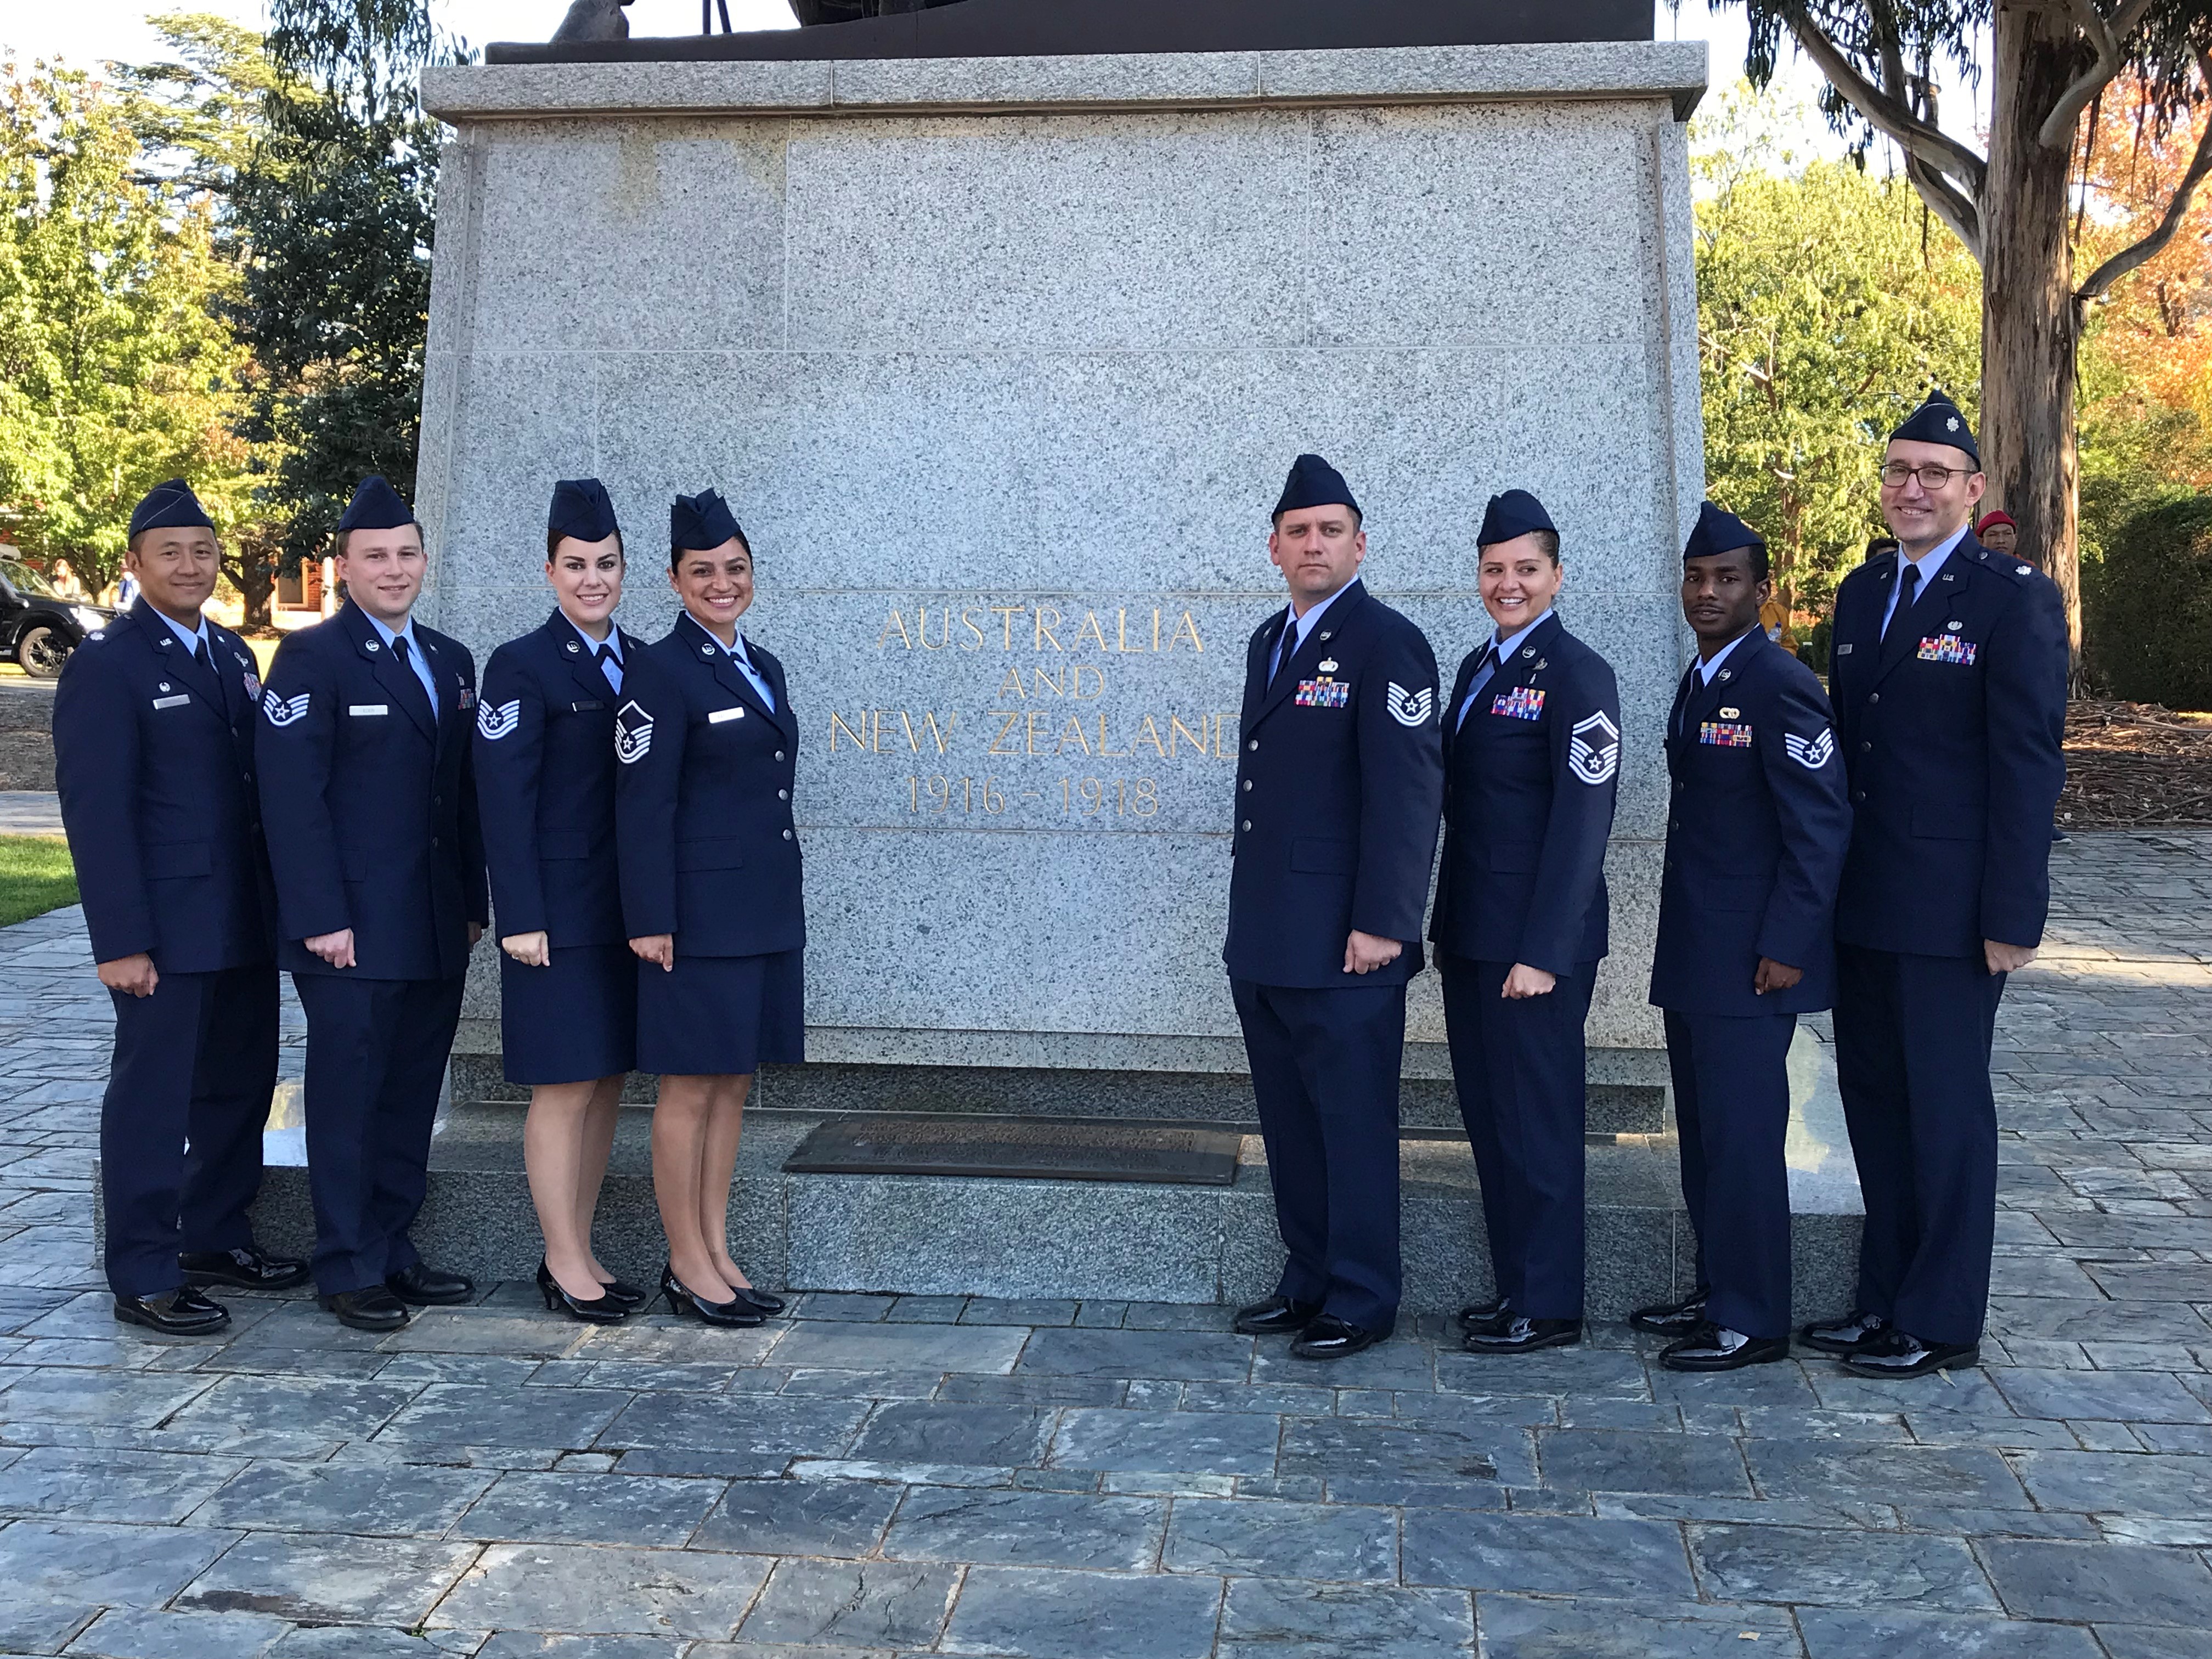 USAF Service members pose as group for photo